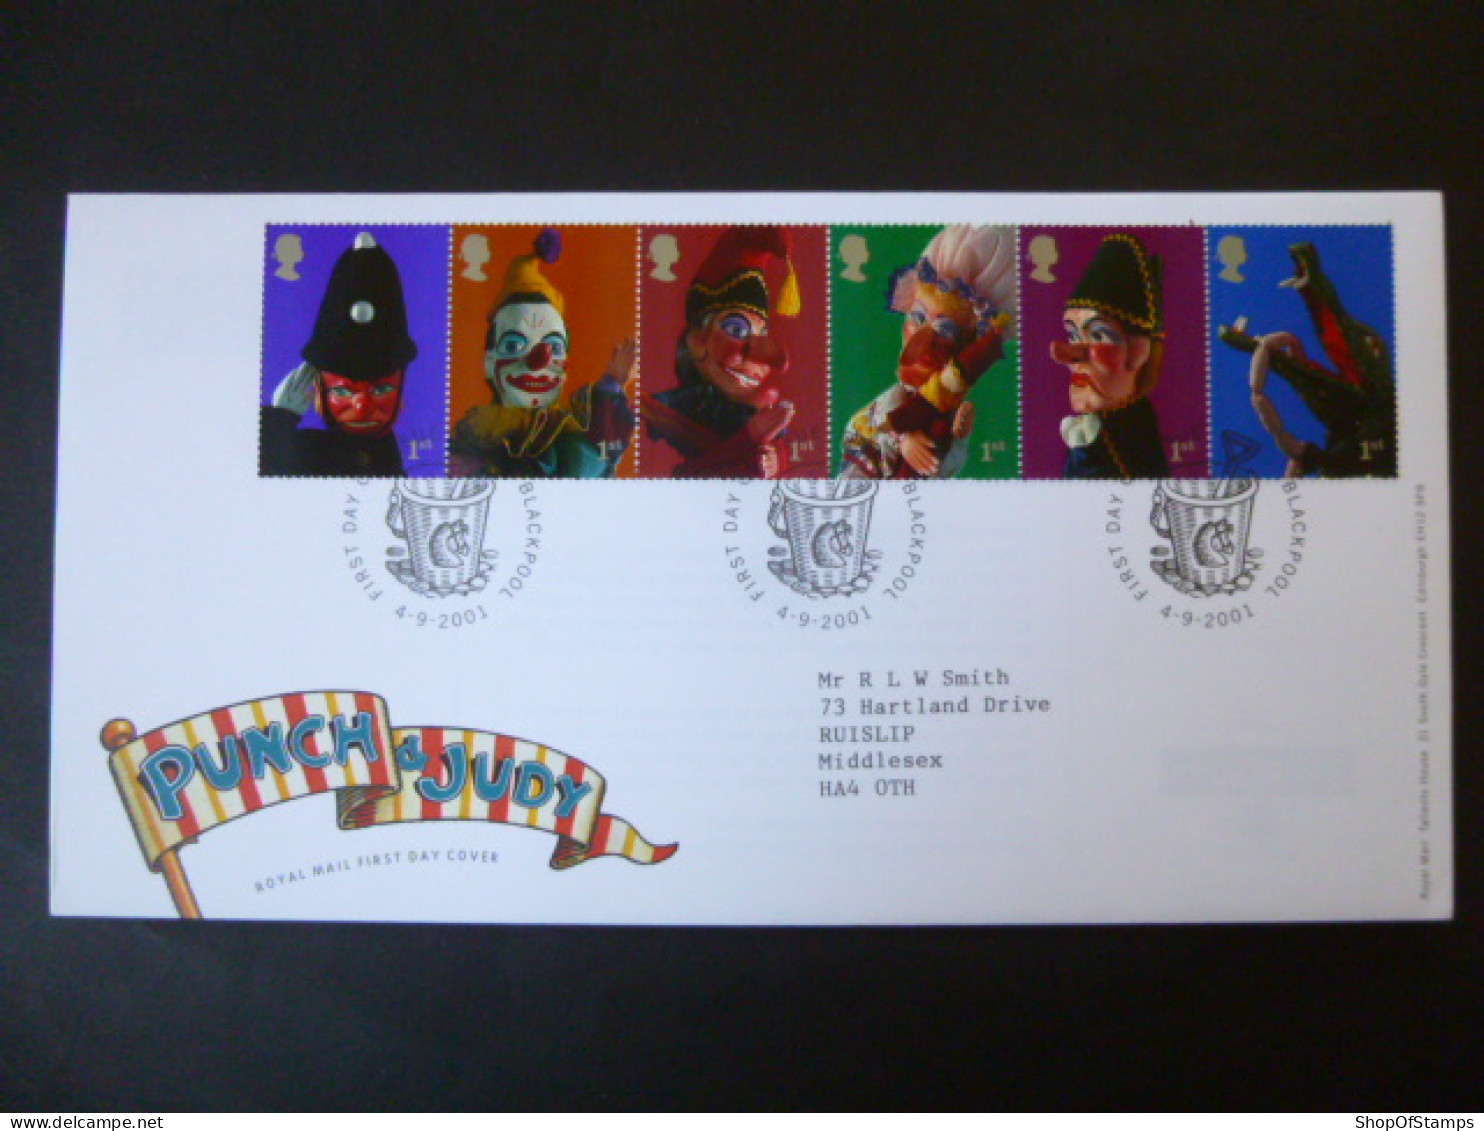 GREAT BRITAIN SG 2224-29 PUNCH AND JUDY SHOW PUPPETS FDC BLACKPOOL - Unclassified